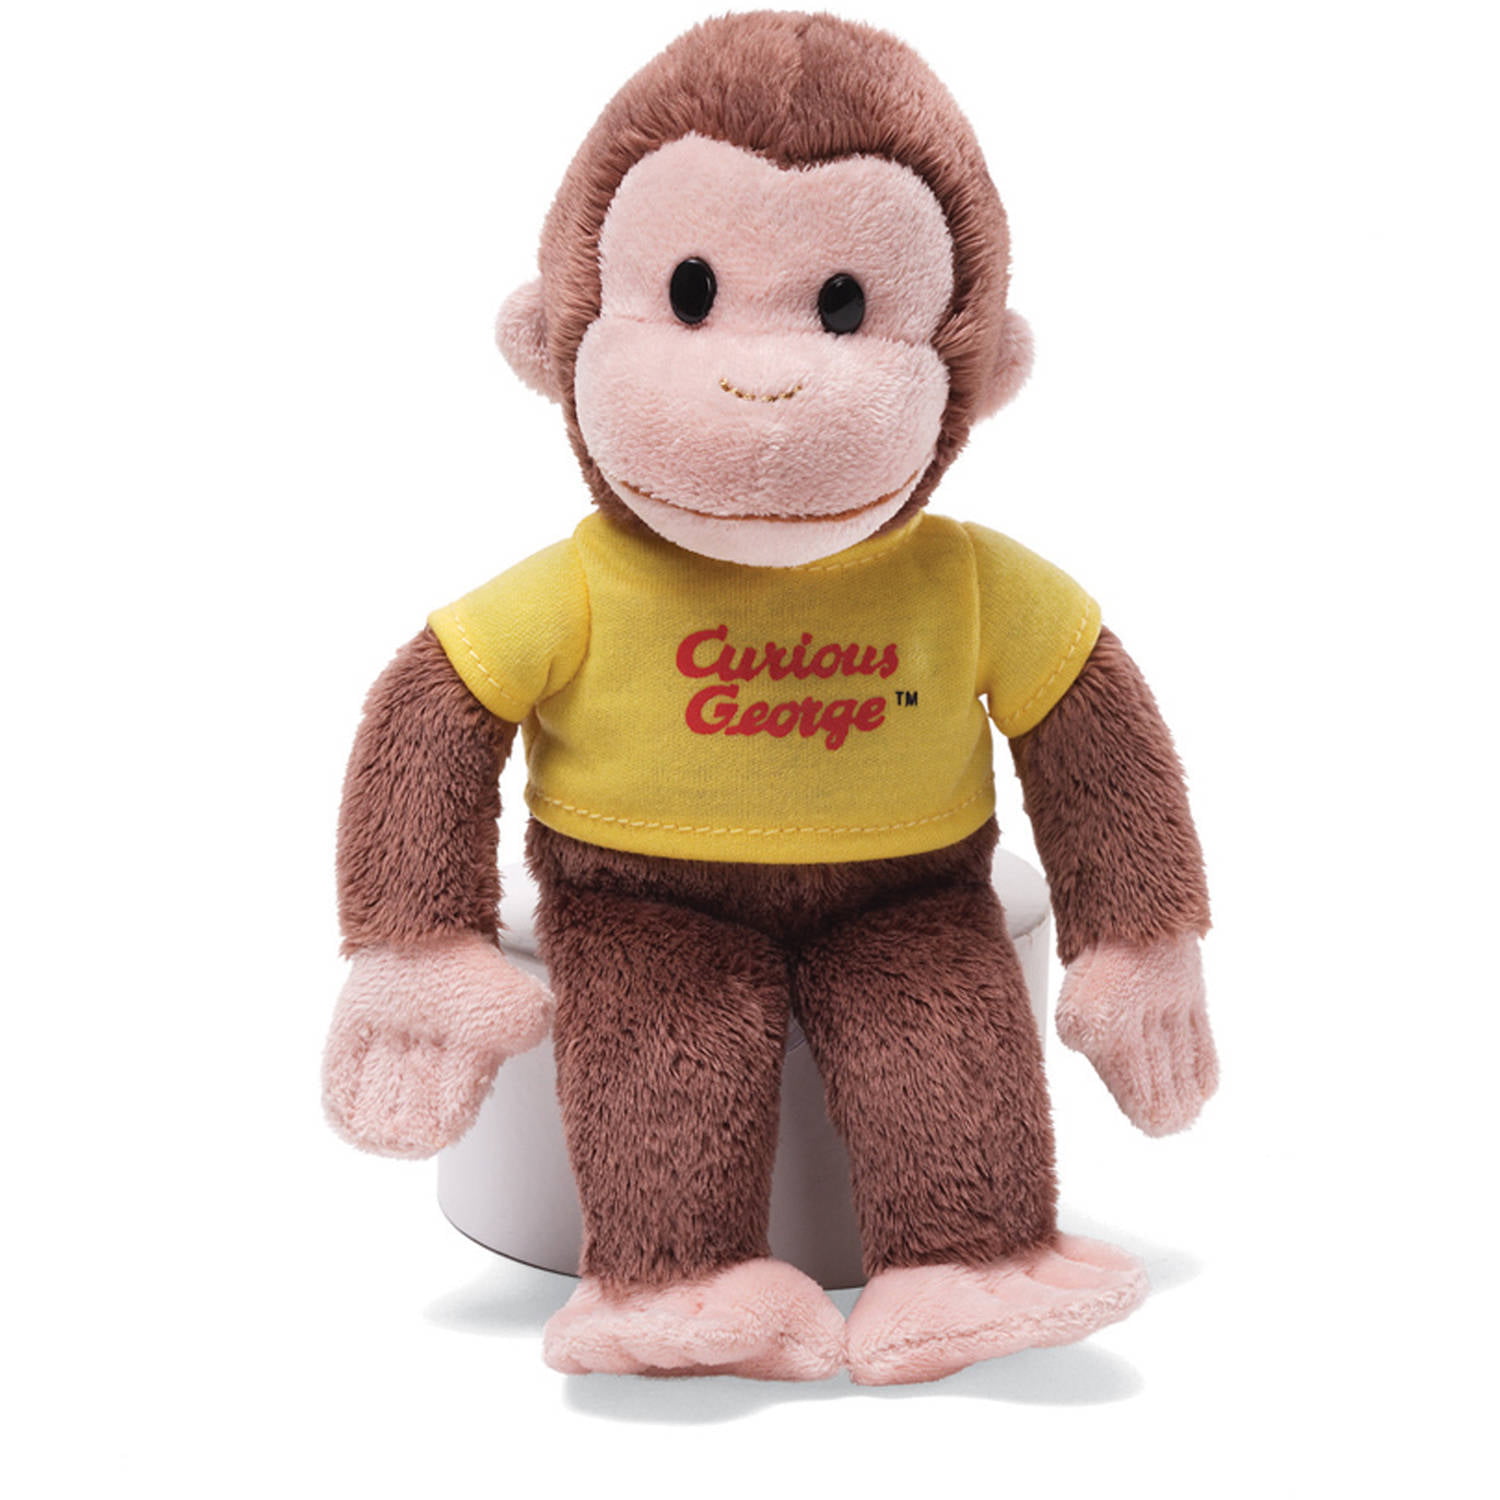 8" Curious George in Red Shirt Gund 